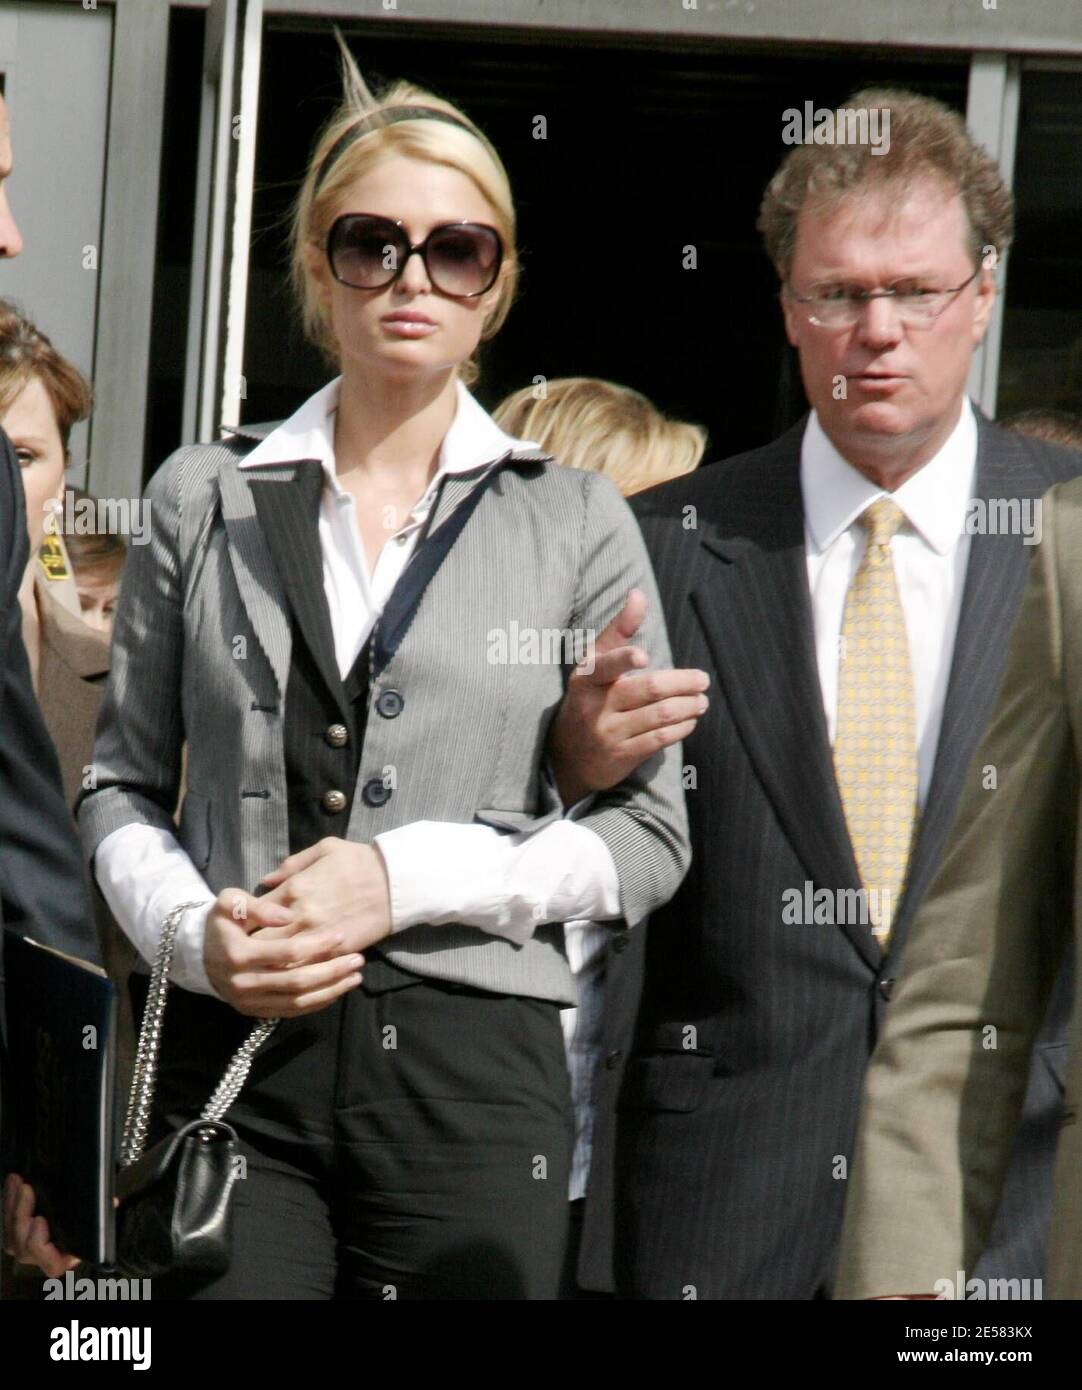 Paris Hilton broke down in tears today as she left a downtown Los Angeles, Ca. courtroom where she was  sentenced to 45 days in jail for driving with a suspended license. Hilton told the judge: "I'm very sorry and from now on I'm going to pay complete attention to everything...I did not do it on purpose at all." Paris needed to be physically supported by her father as she exited the building and held her head high as tears streamed down her face but it wasn't until she was inside her car that Paris broke down sobbing. Also attending the probation revocation hearing was Paris' mother Kathy. 5/4 Stock Photo